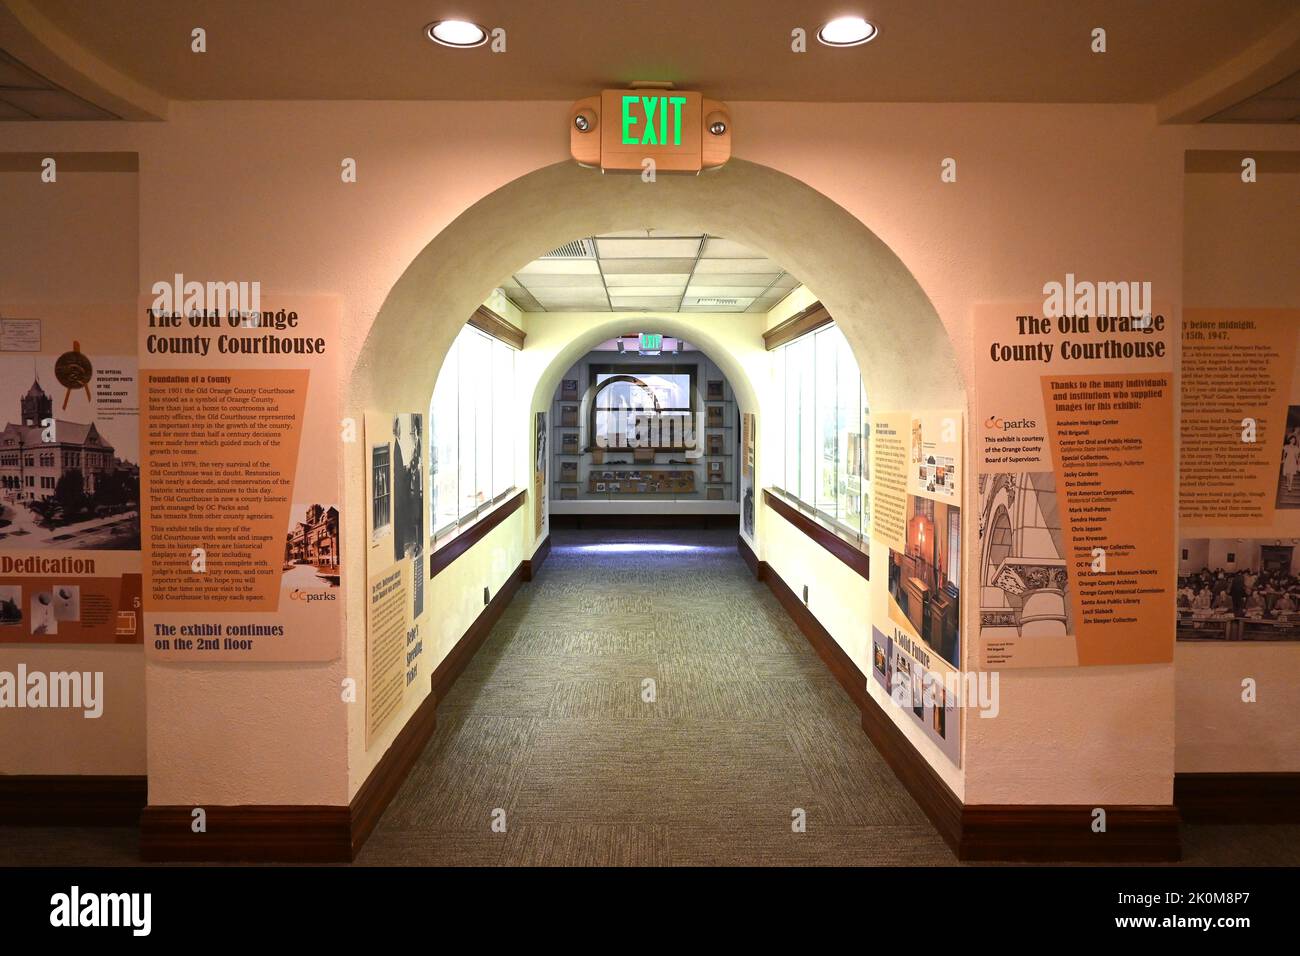 SANTA ANA, CALIFORNIA - 22 AUG 2022: Museum Exhibit on the first floor of the historic Old Orange County Courthouse. Stock Photo